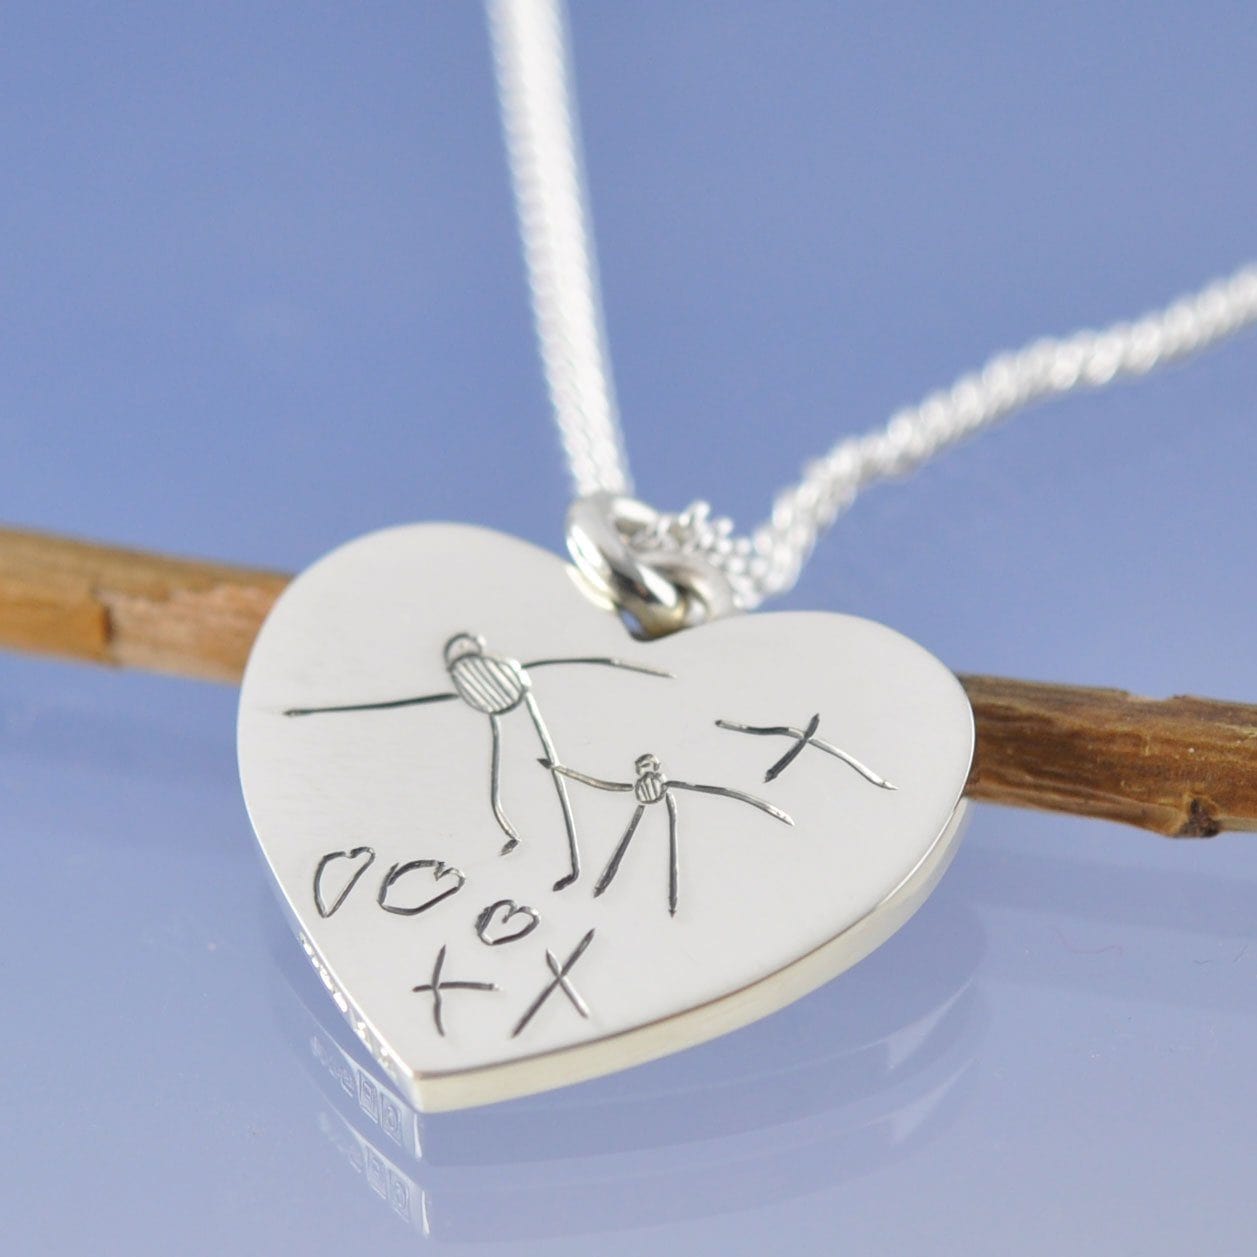 Hand Writing Pendant Cufflinks by Chris Parry Jewellery